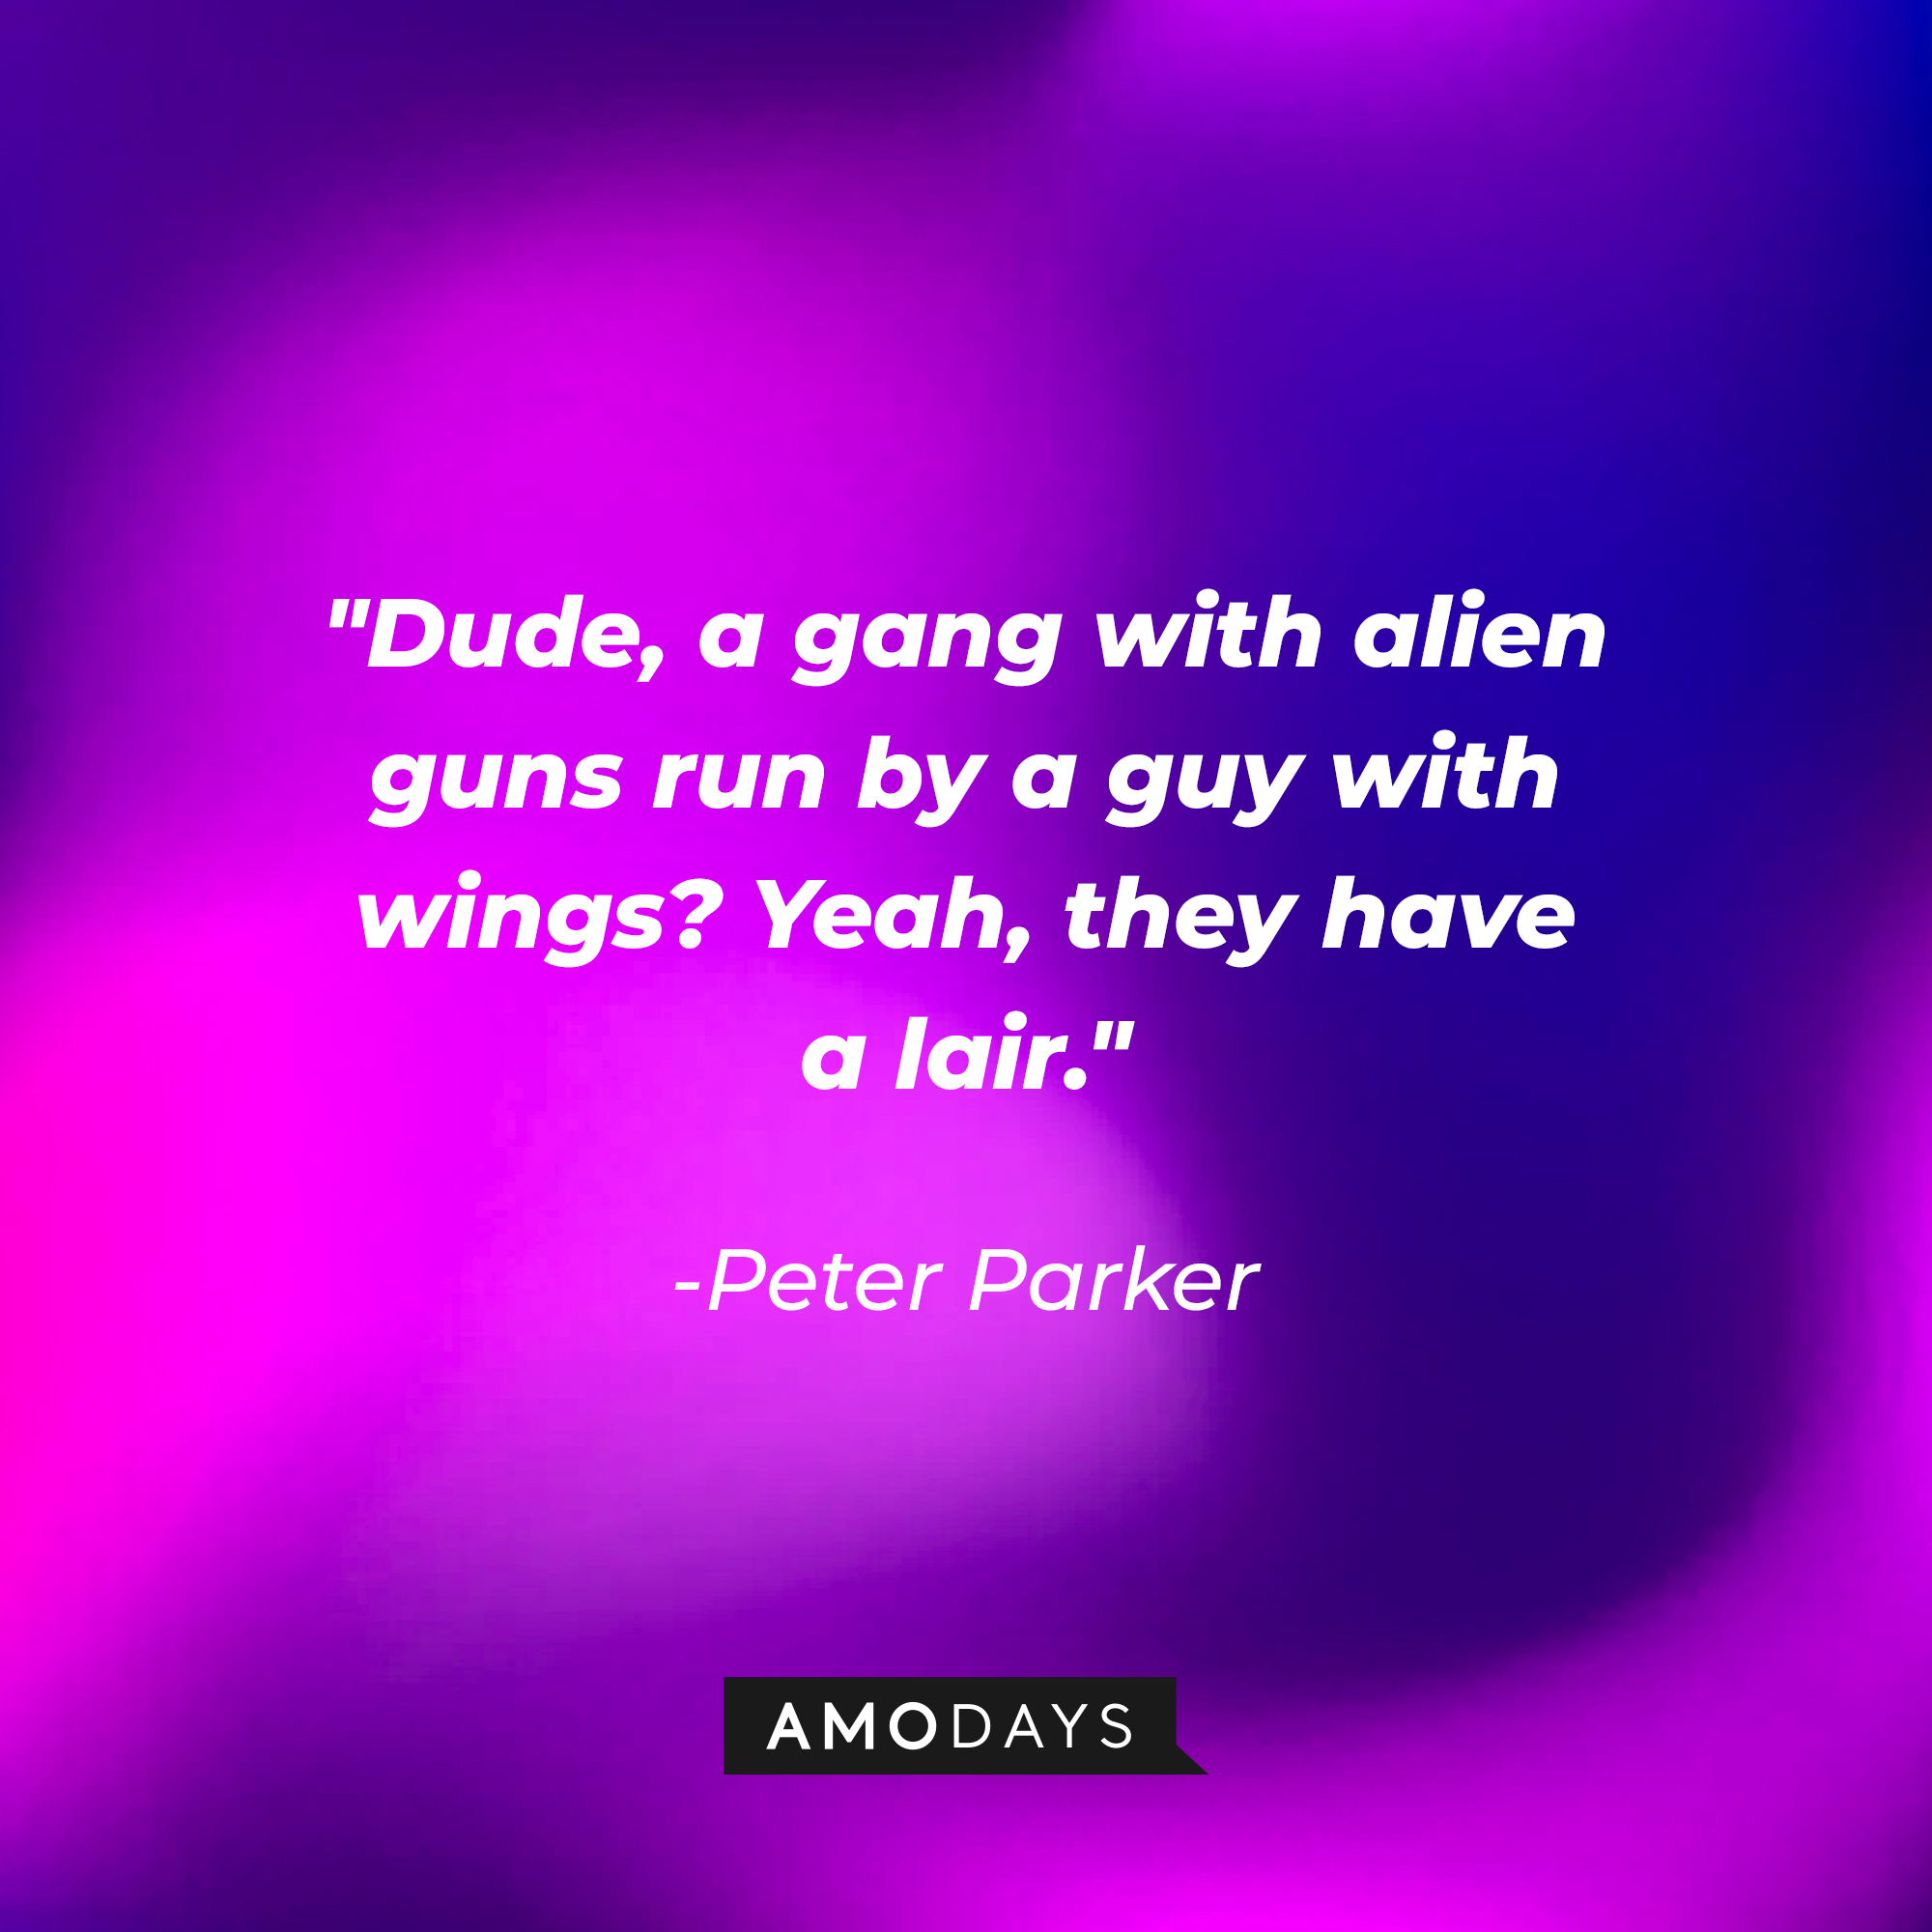 Peter Parker ‘s quote: Dude, a gang with alien guns run by a guy with wings? Yeah, they have a lair. | Image AmoDays